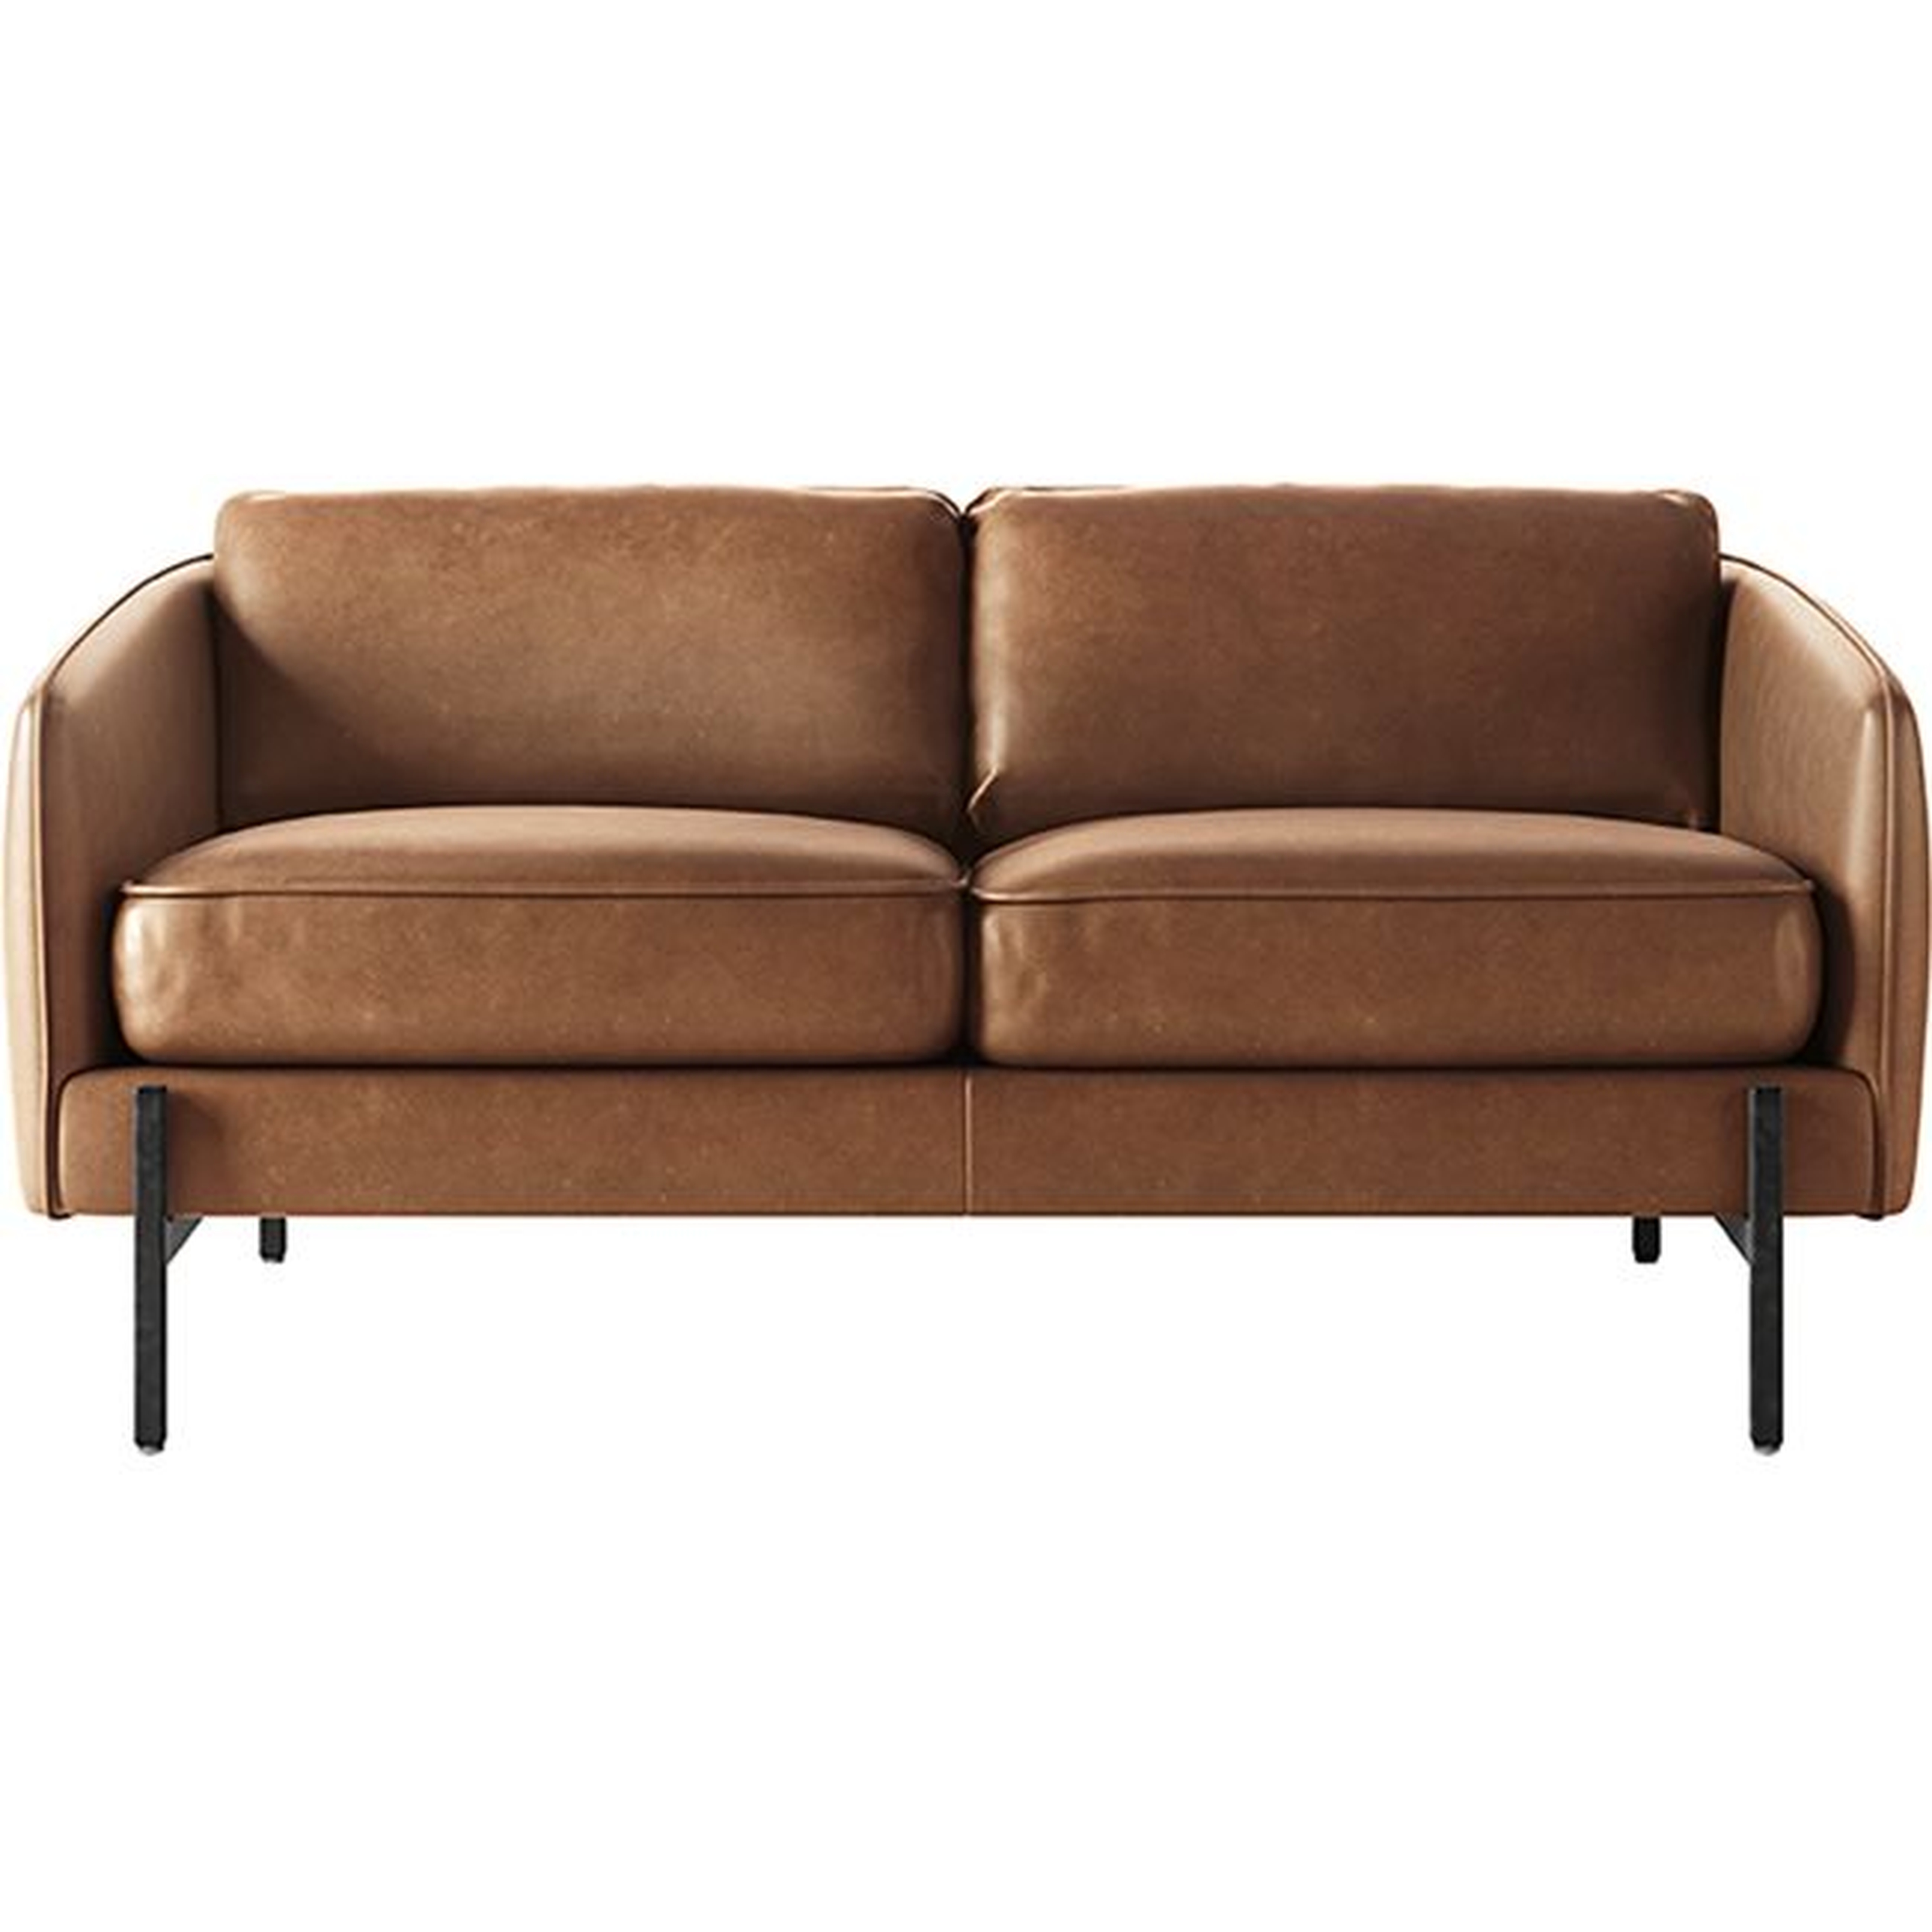 Hoxton Loveseat with Black Legs, Saddle Leather - CB2